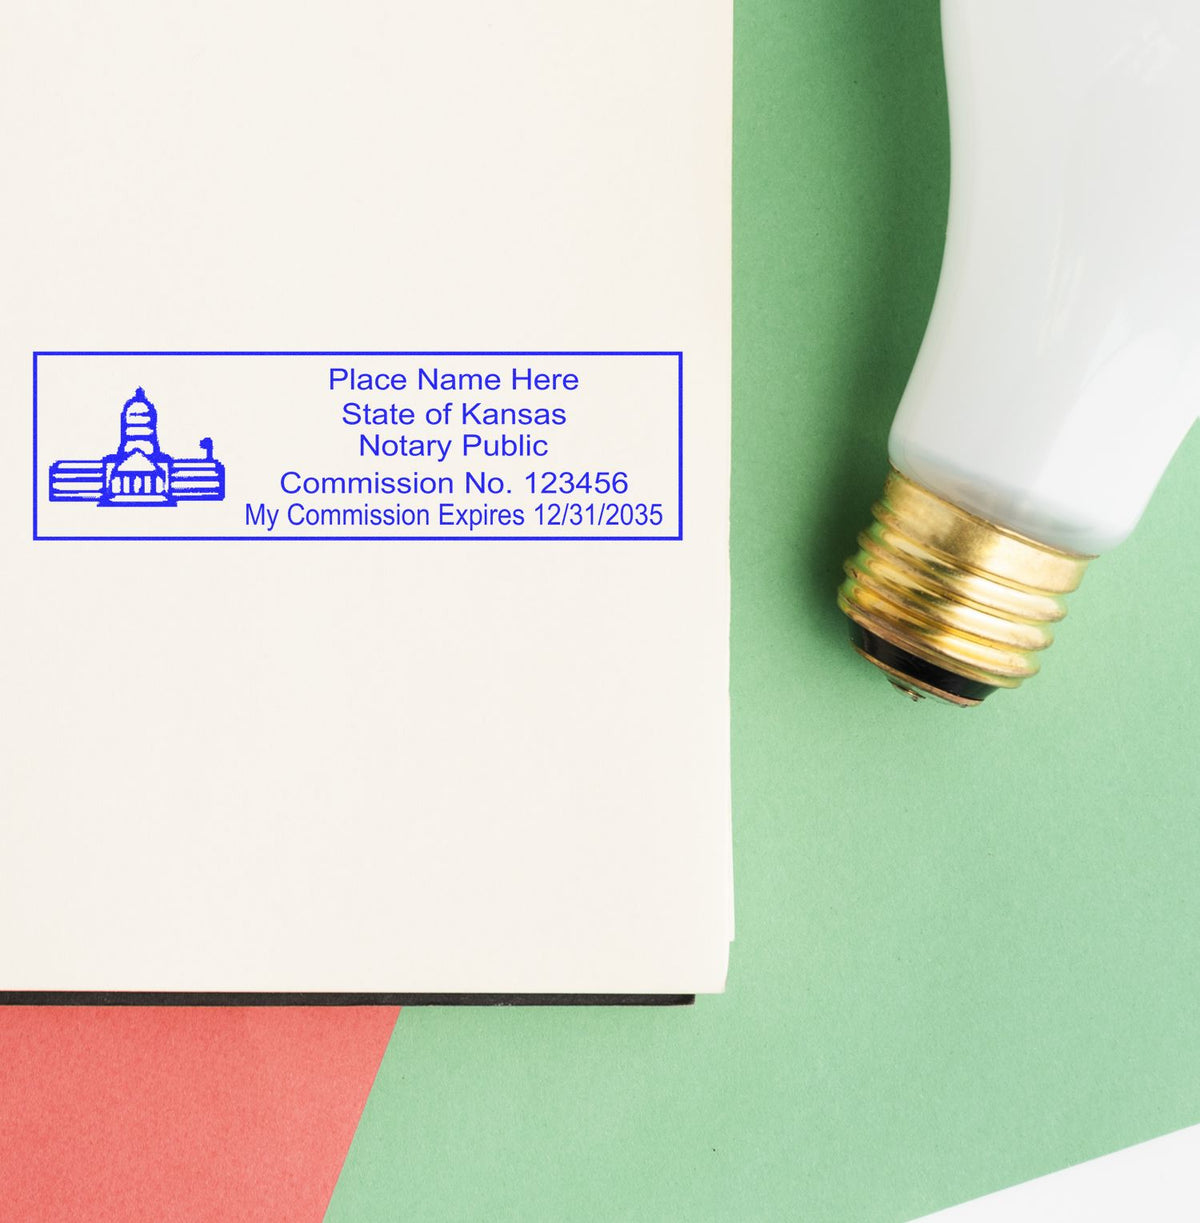 This paper is stamped with a sample imprint of the Wooden Handle Kansas State Seal Notary Public Stamp, signifying its quality and reliability.